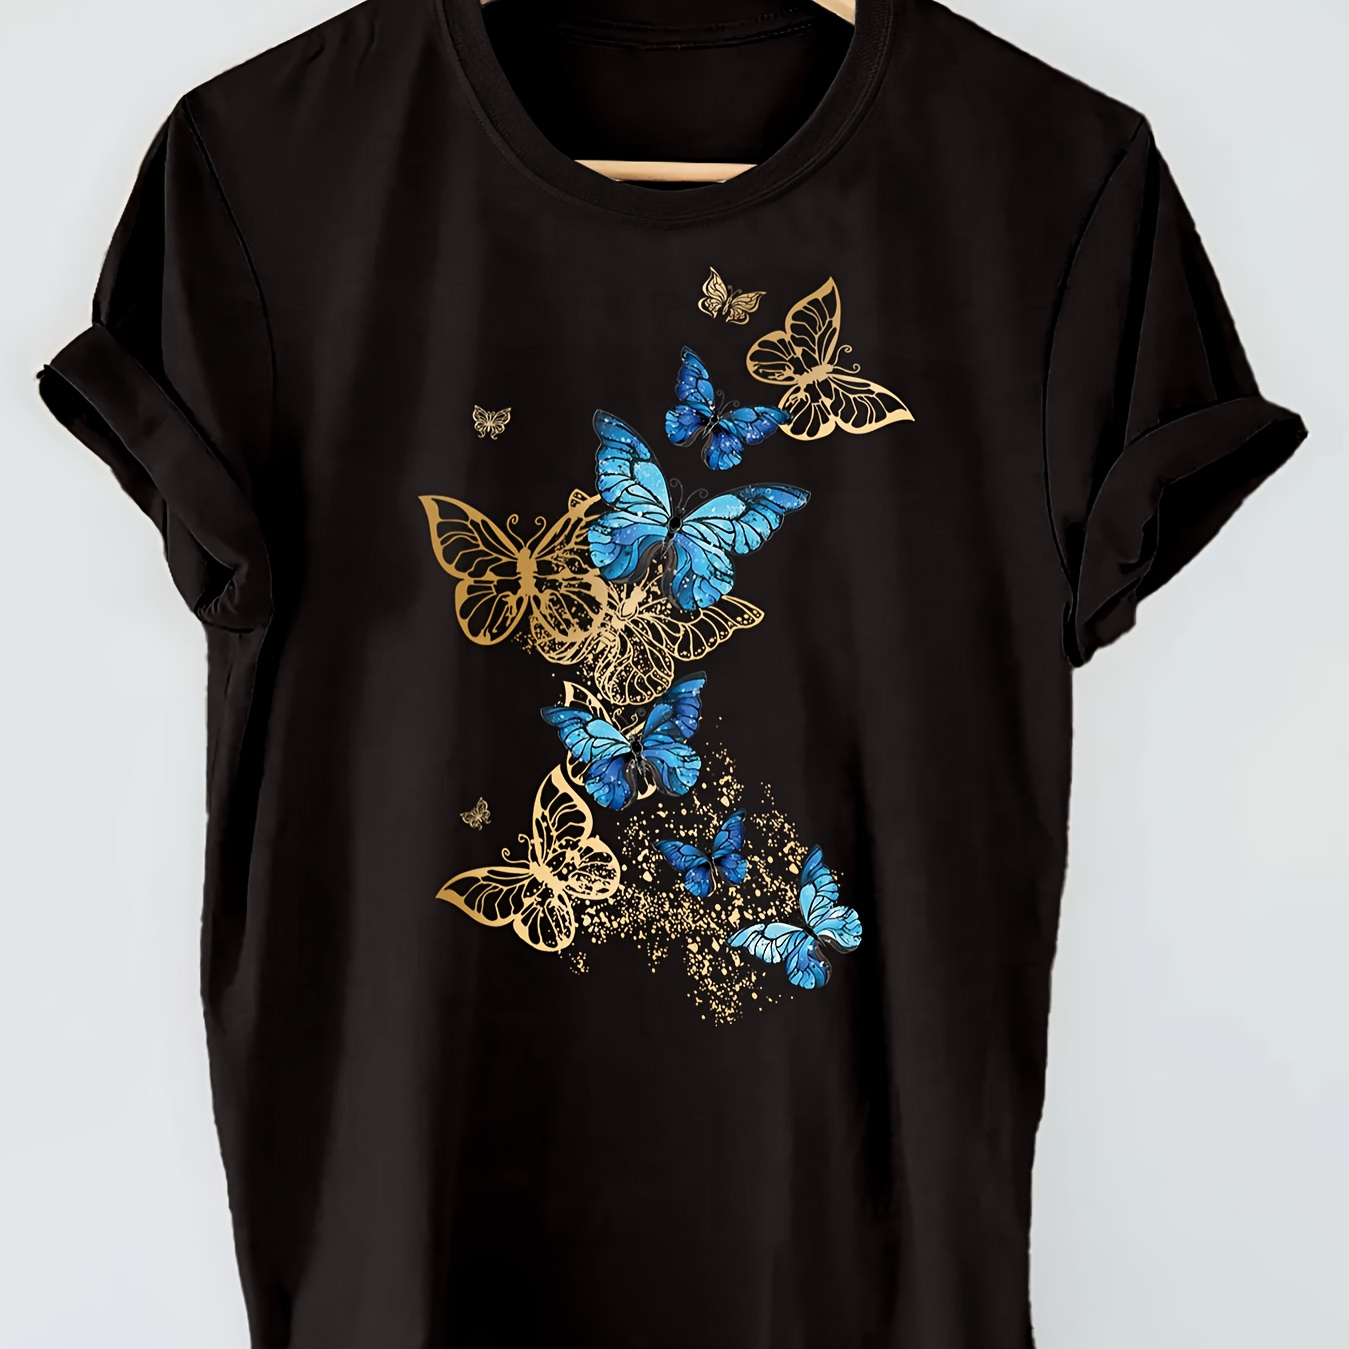 

Butterflies Graphic Print T-shirt, Short Sleeve Crew Neck Casual Top For Summer & Spring, Women's Clothing